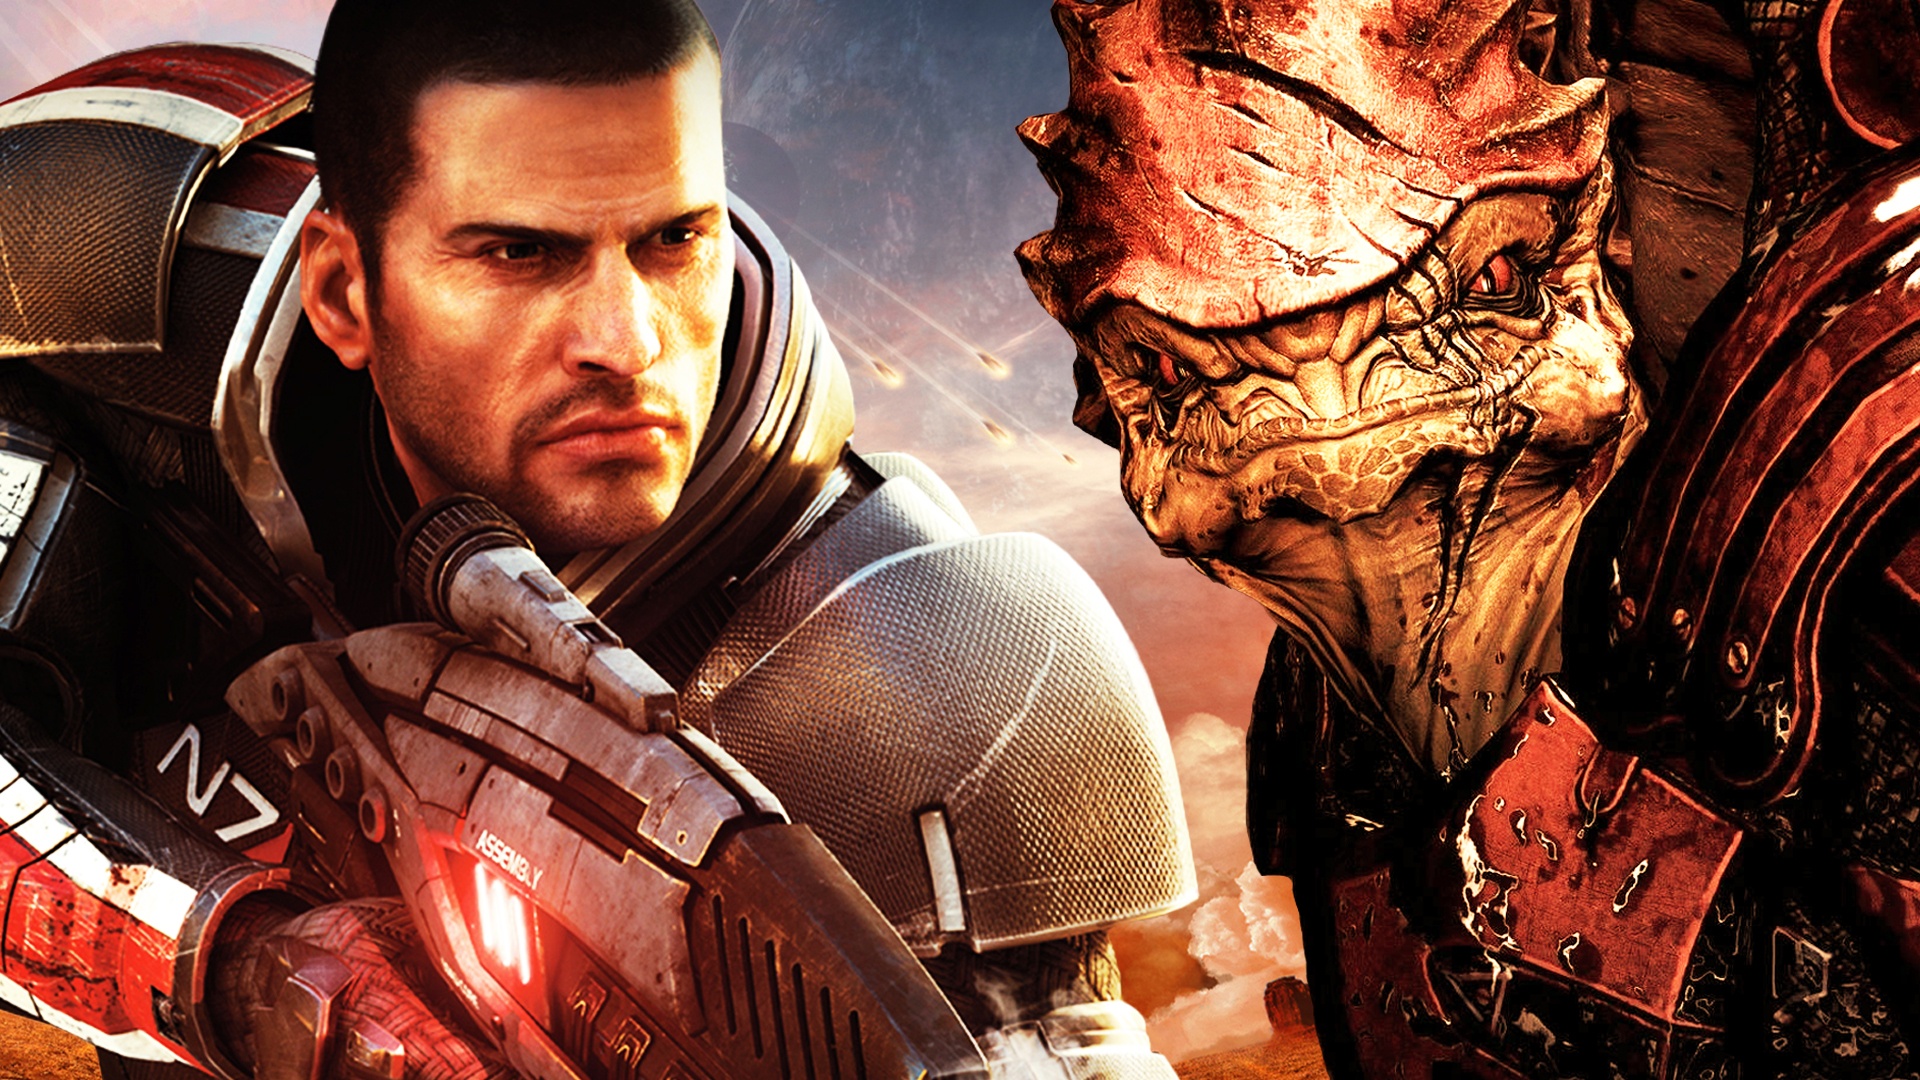 Mass Effect Remastered. Remastered effects